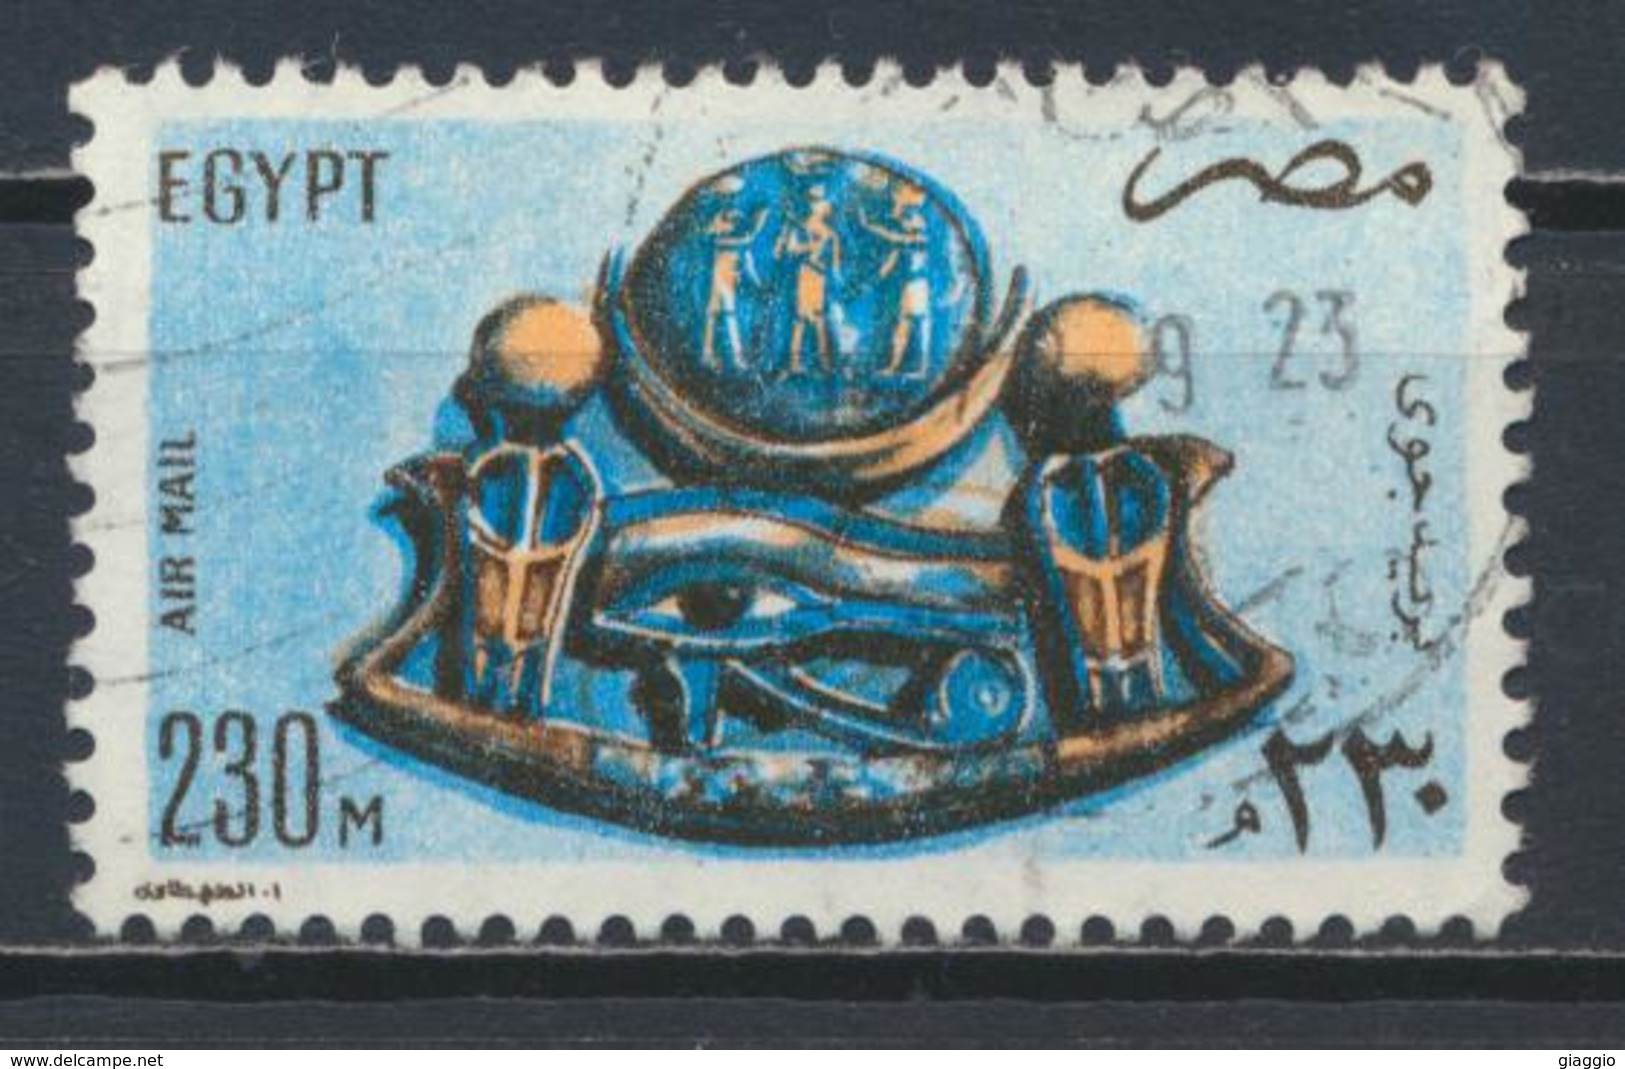 °°° EGYPT - YT 164 PA - 1981 °°° - Used Stamps